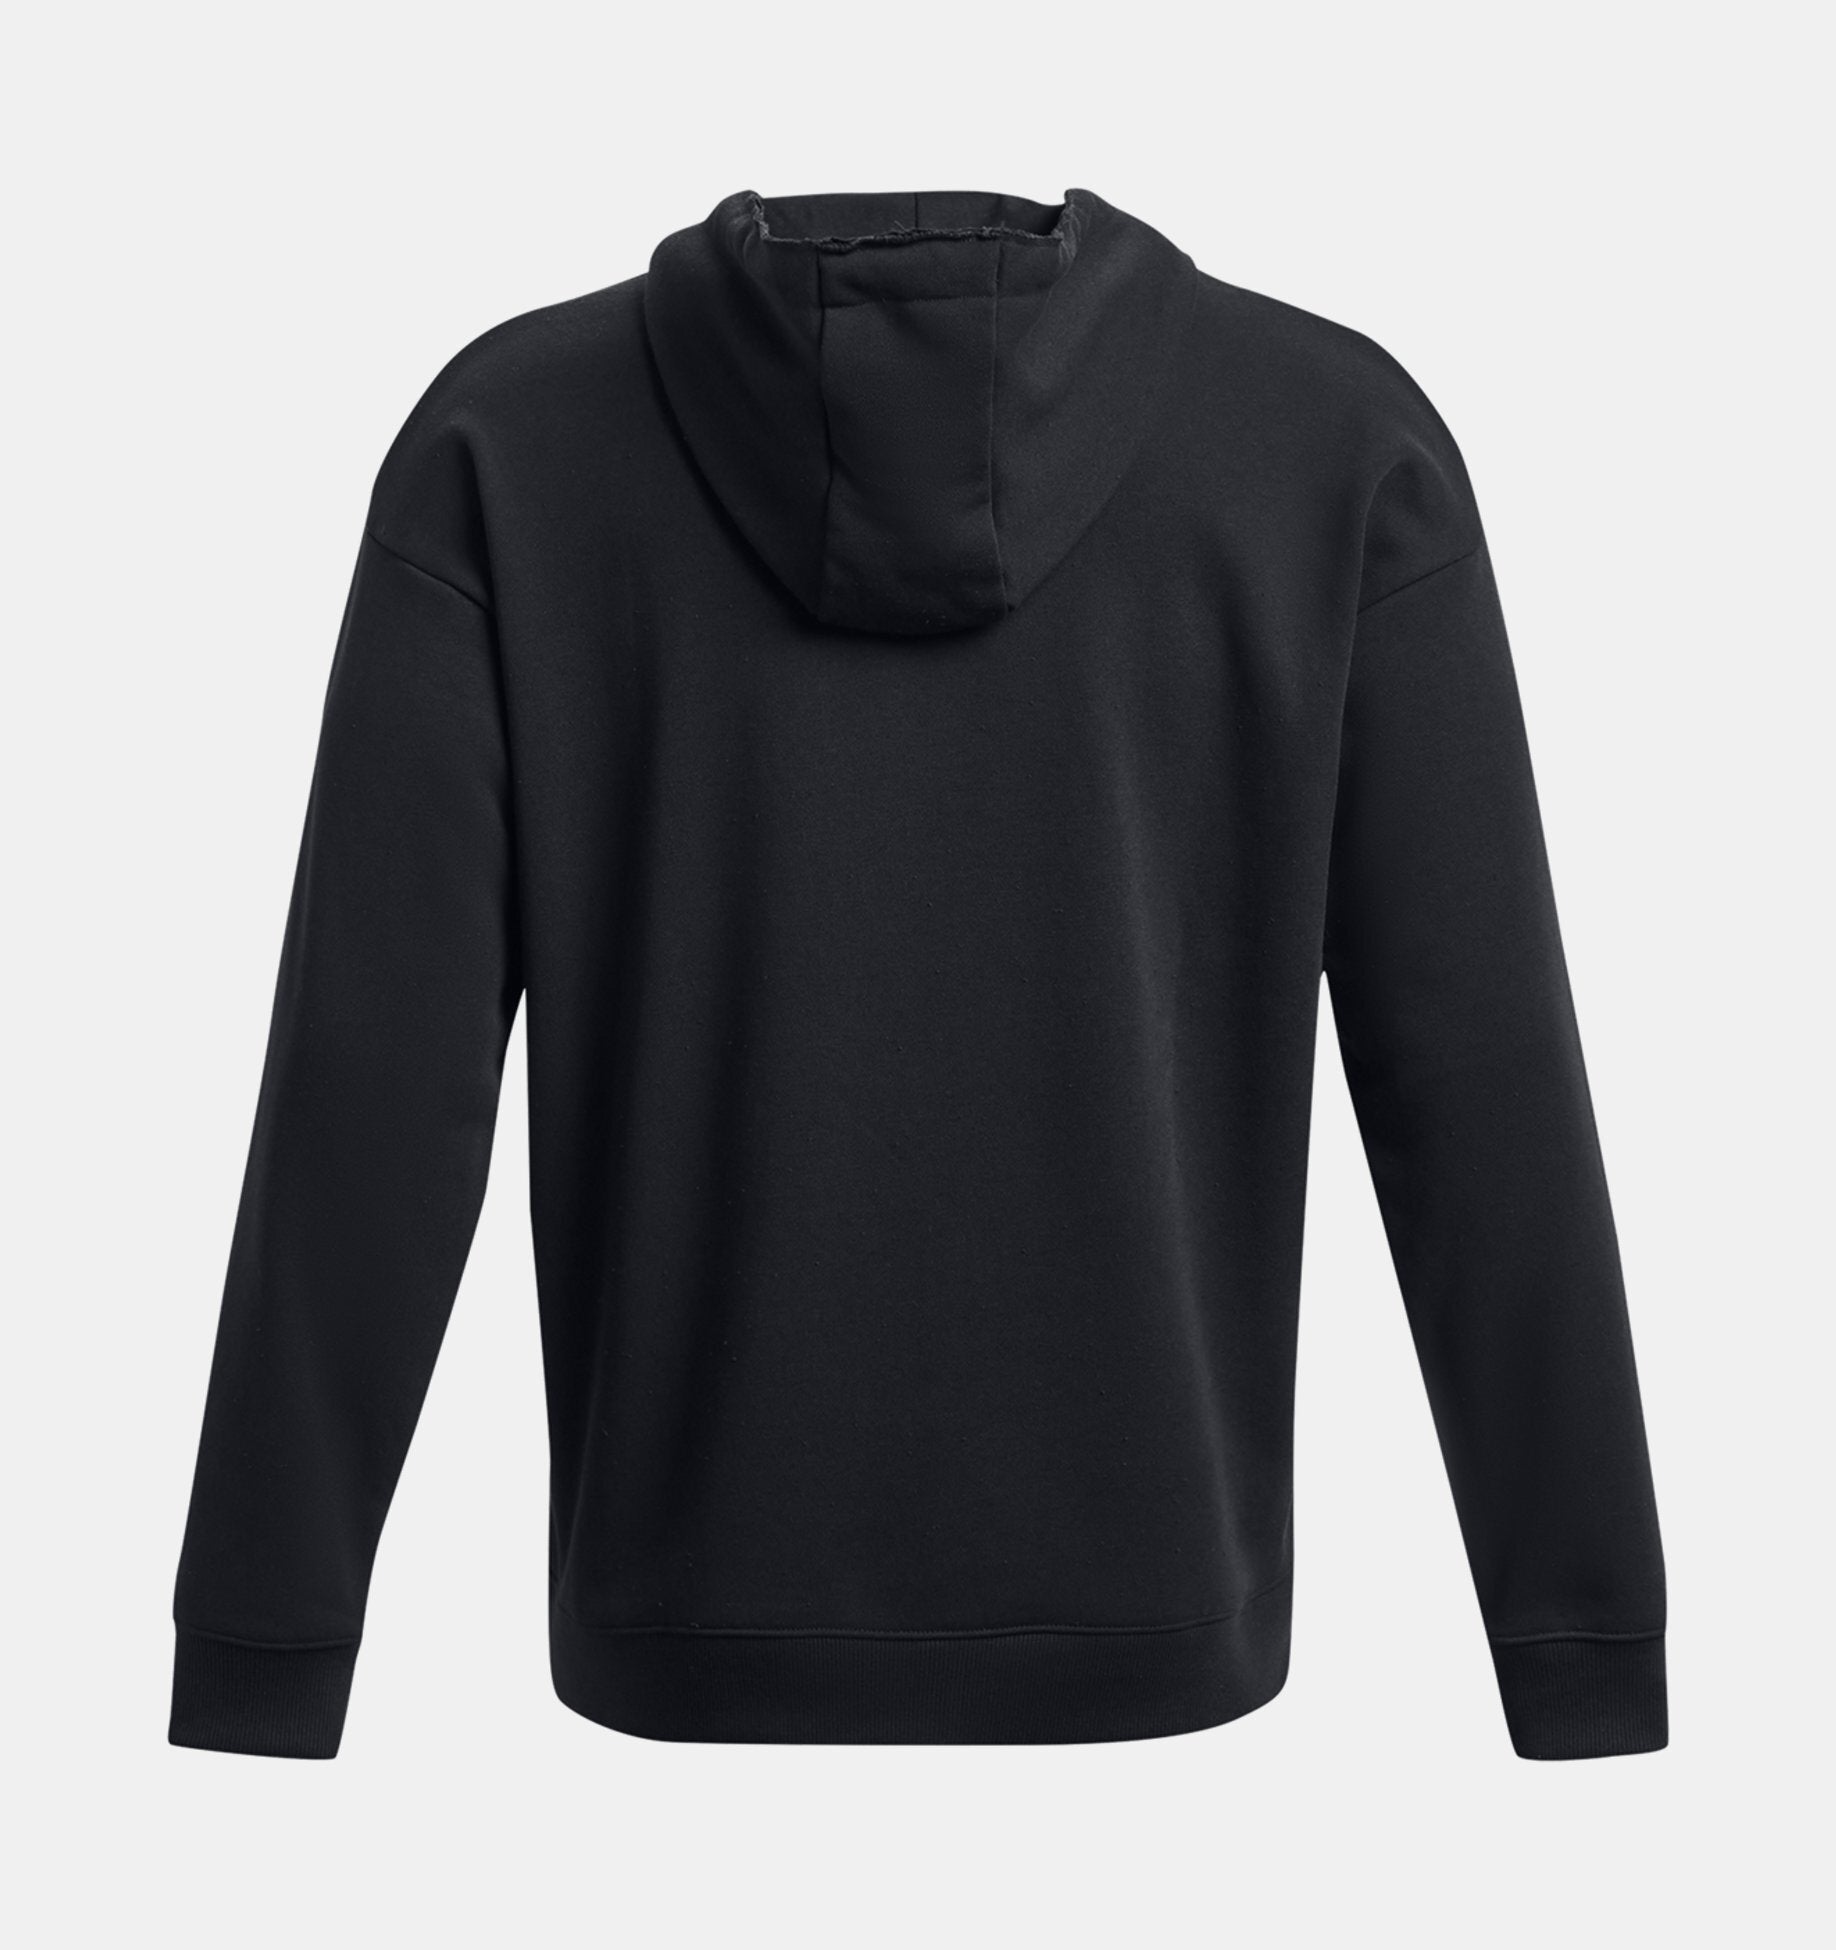 Under Armour Men's Project Rock Heavyweight Terry Hoodie Black